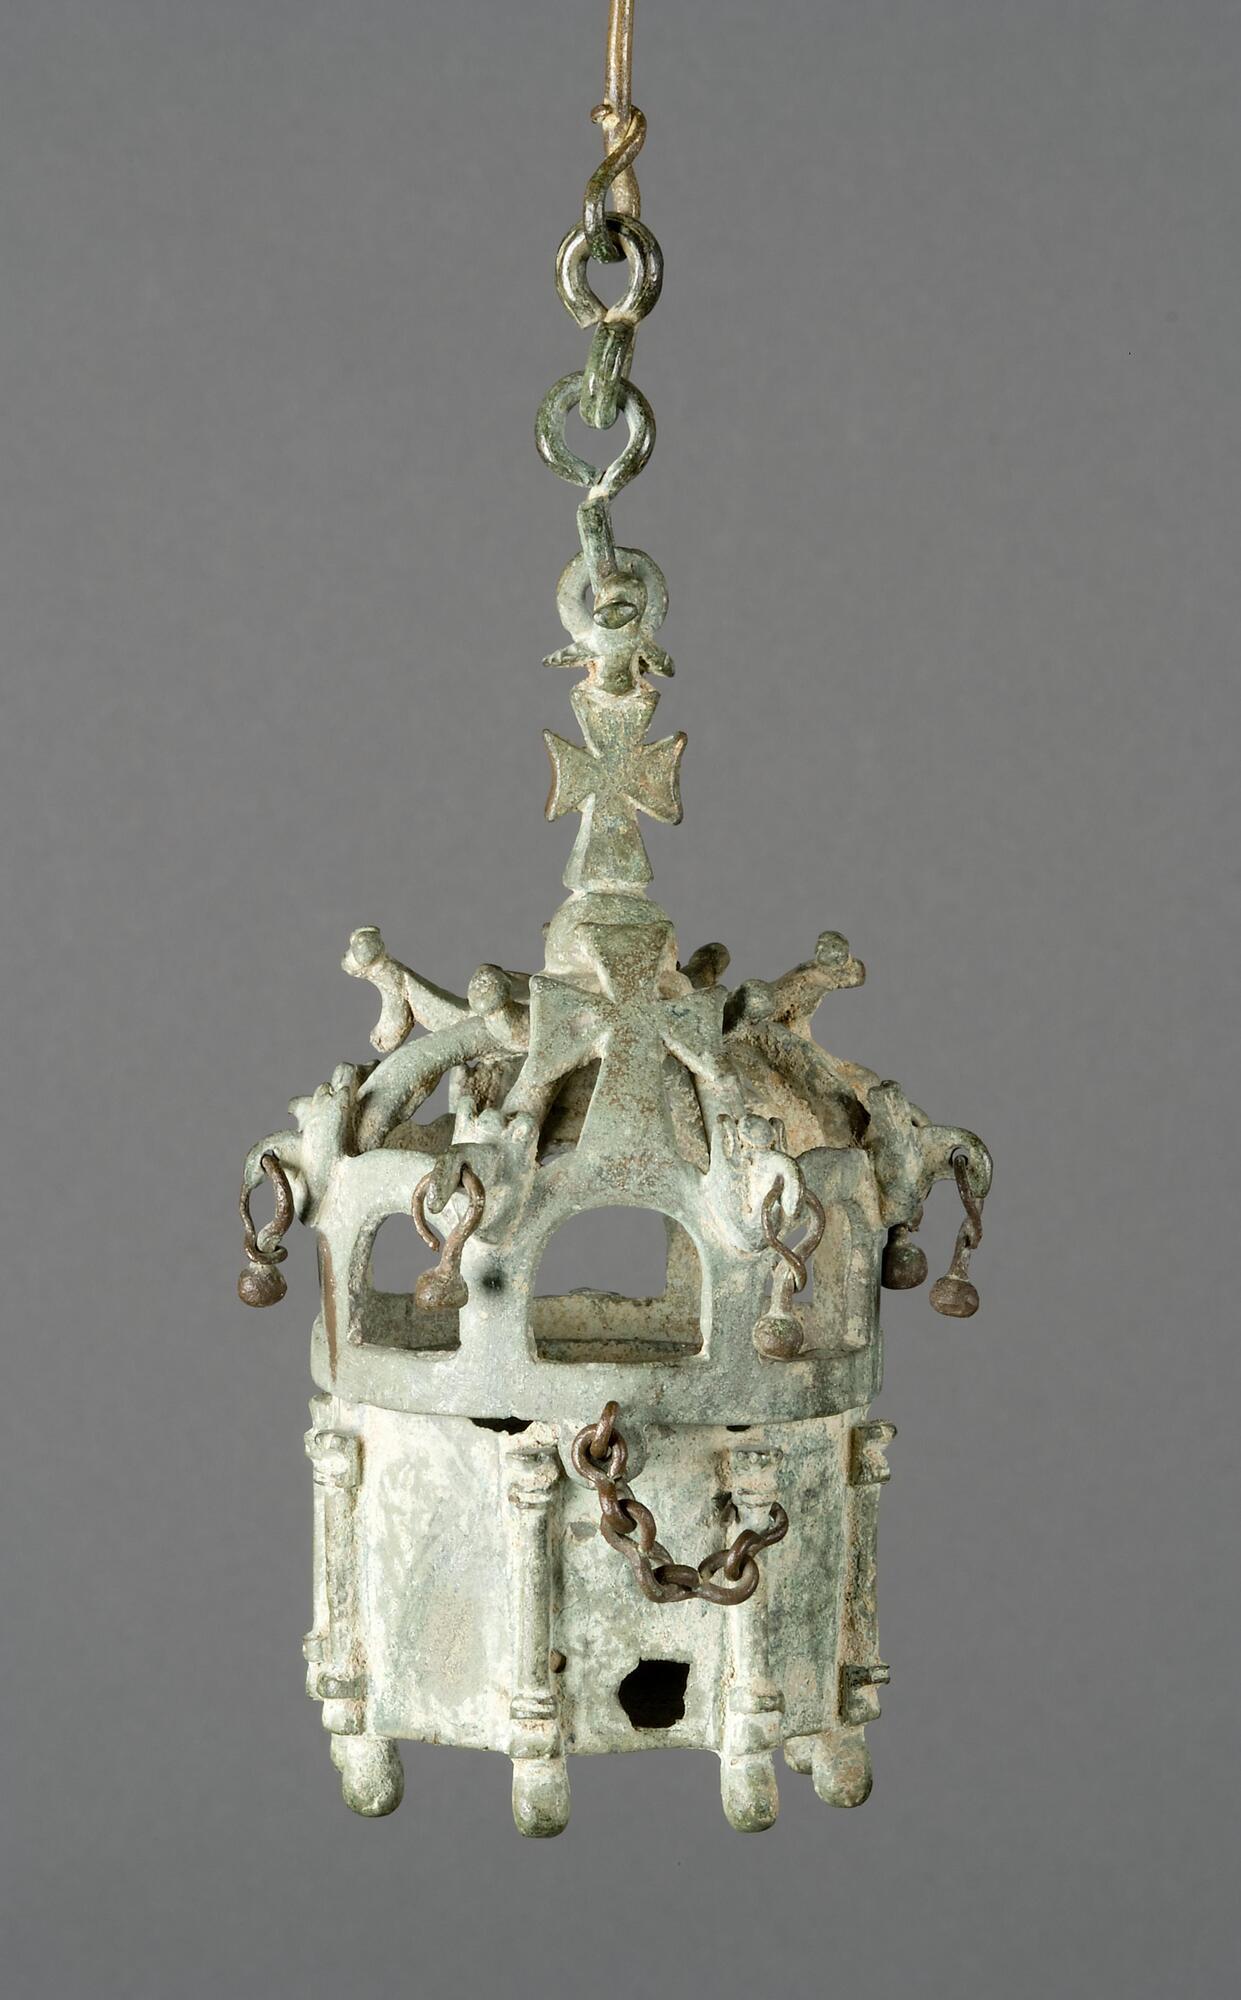 The body of this cylindrical censer is decorated with eight columns spaced at regular intervals. The lid of the censer consists of an openwork dome divided into sections by eight vertical ribs that converge at its apex. An arched horizontal band intersects the midpoint of the ribs, and these eight junctures are marked with a projecting bird that holds a small bronze ball dangling from its beak. Two segments of the dome are decorated with Maltese crosses while another two feature curved plant forms. The apex is surmounted by a finial comprised of a globe topped by a Maltese cross on which a bird holding a piece of fruit perches.